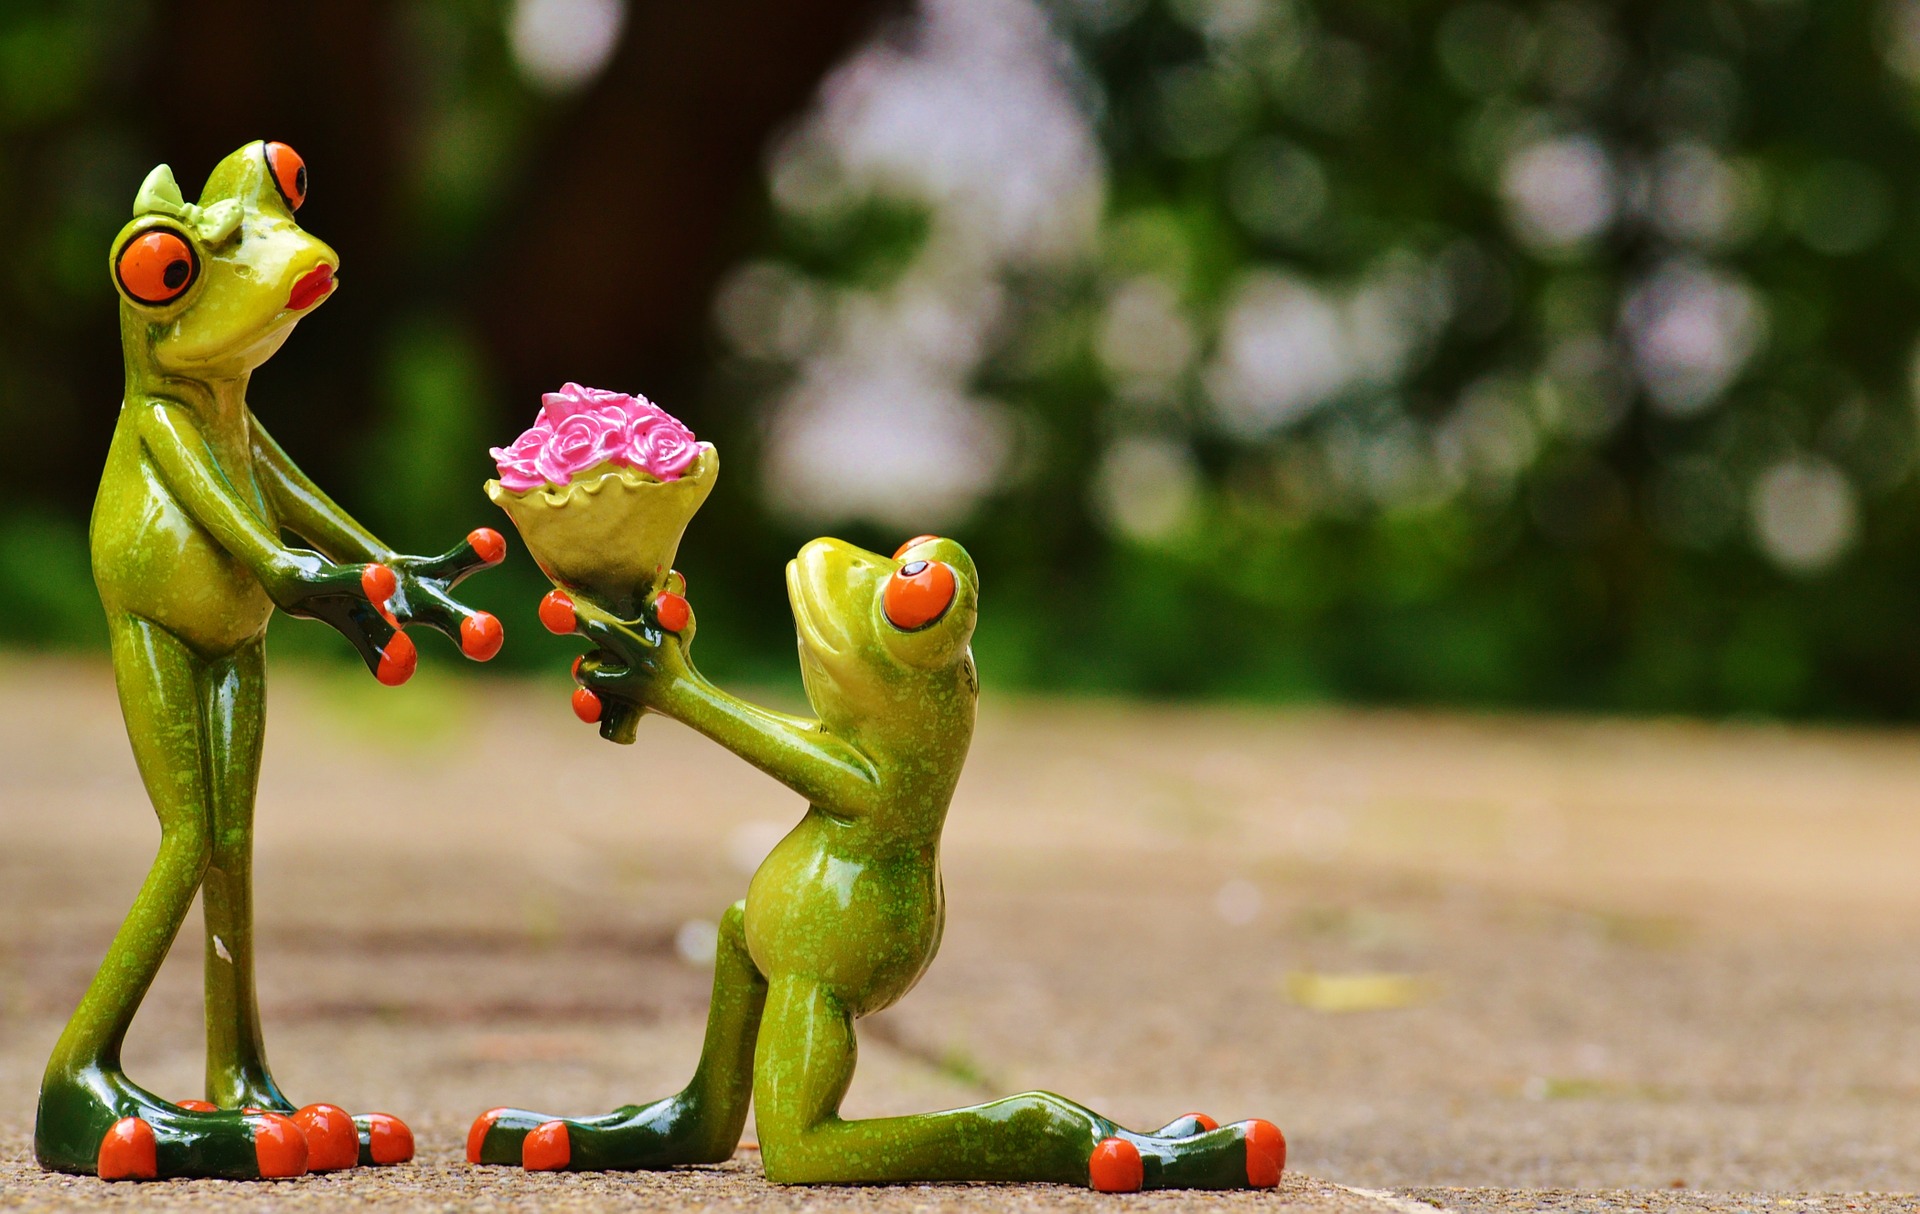 Be our Valentine at Harrogate Lifestyle Apartments #Harrogatelifestyleblog romantic moment between Prince charming frog and his love